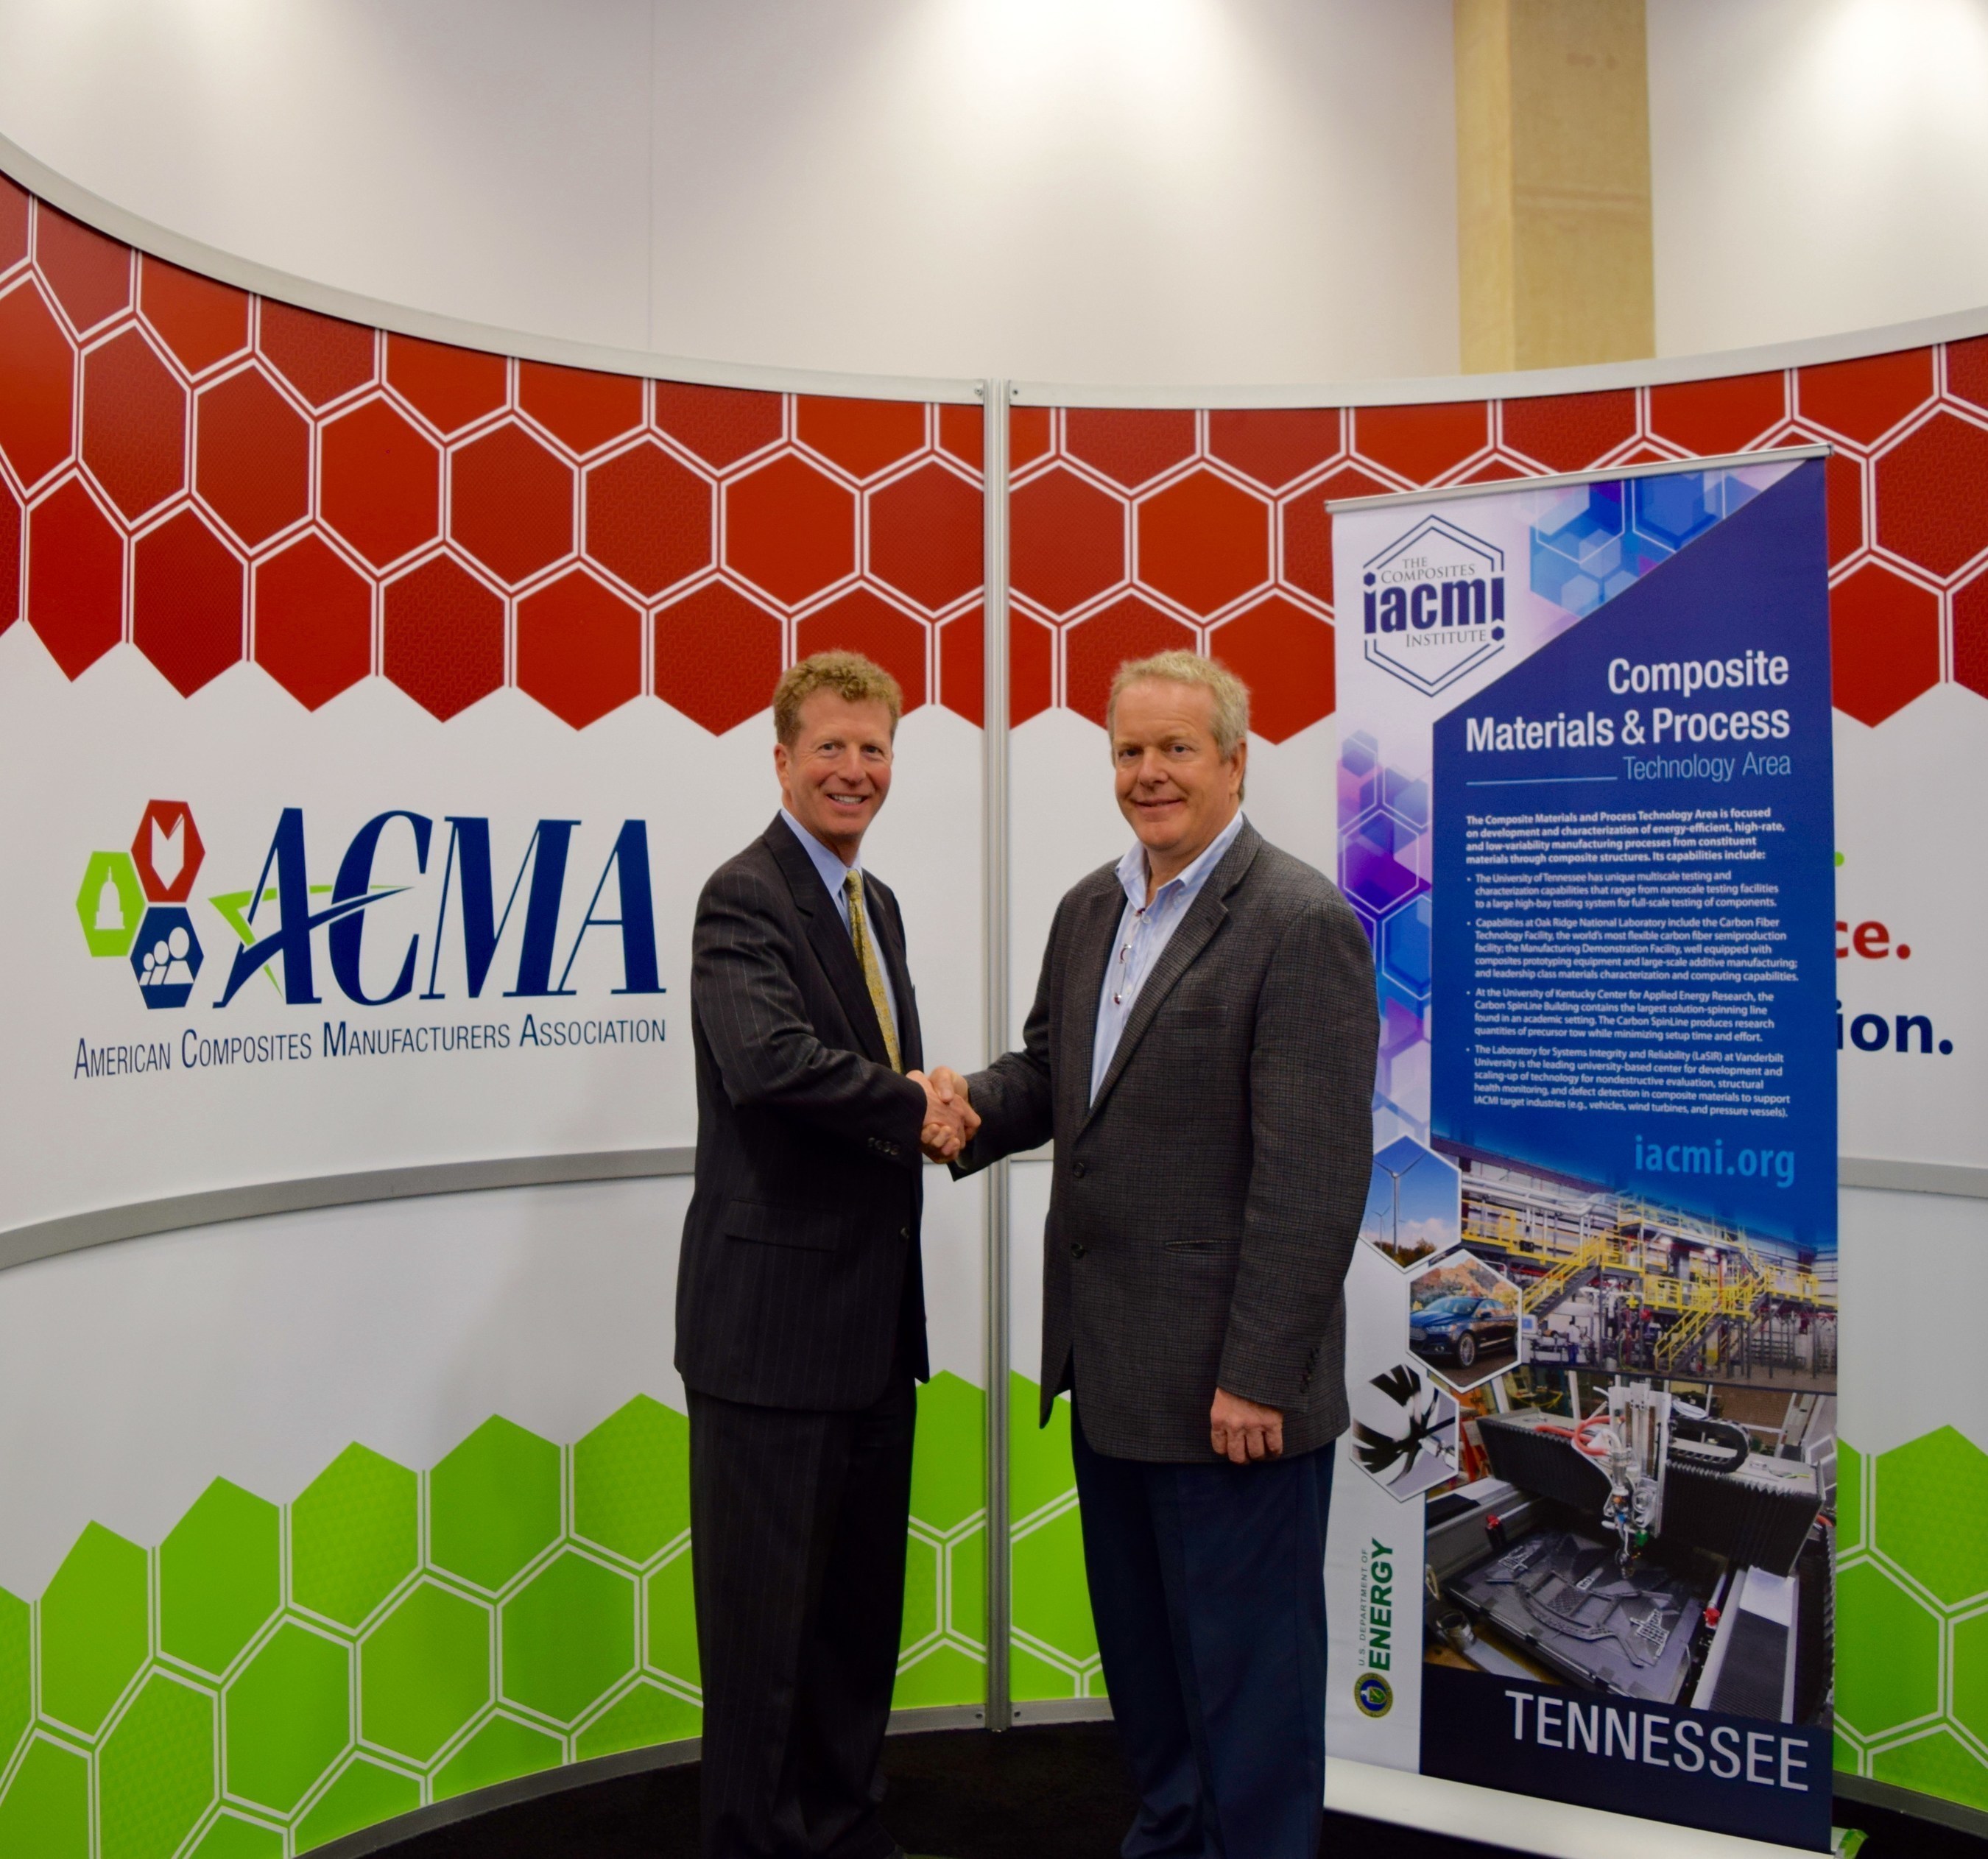 Tom Dobbins, ACMA President and Craig Blue, IACMI CEO signed a partnership agreement and will be collaborating on composites training and workforce development initiatives.